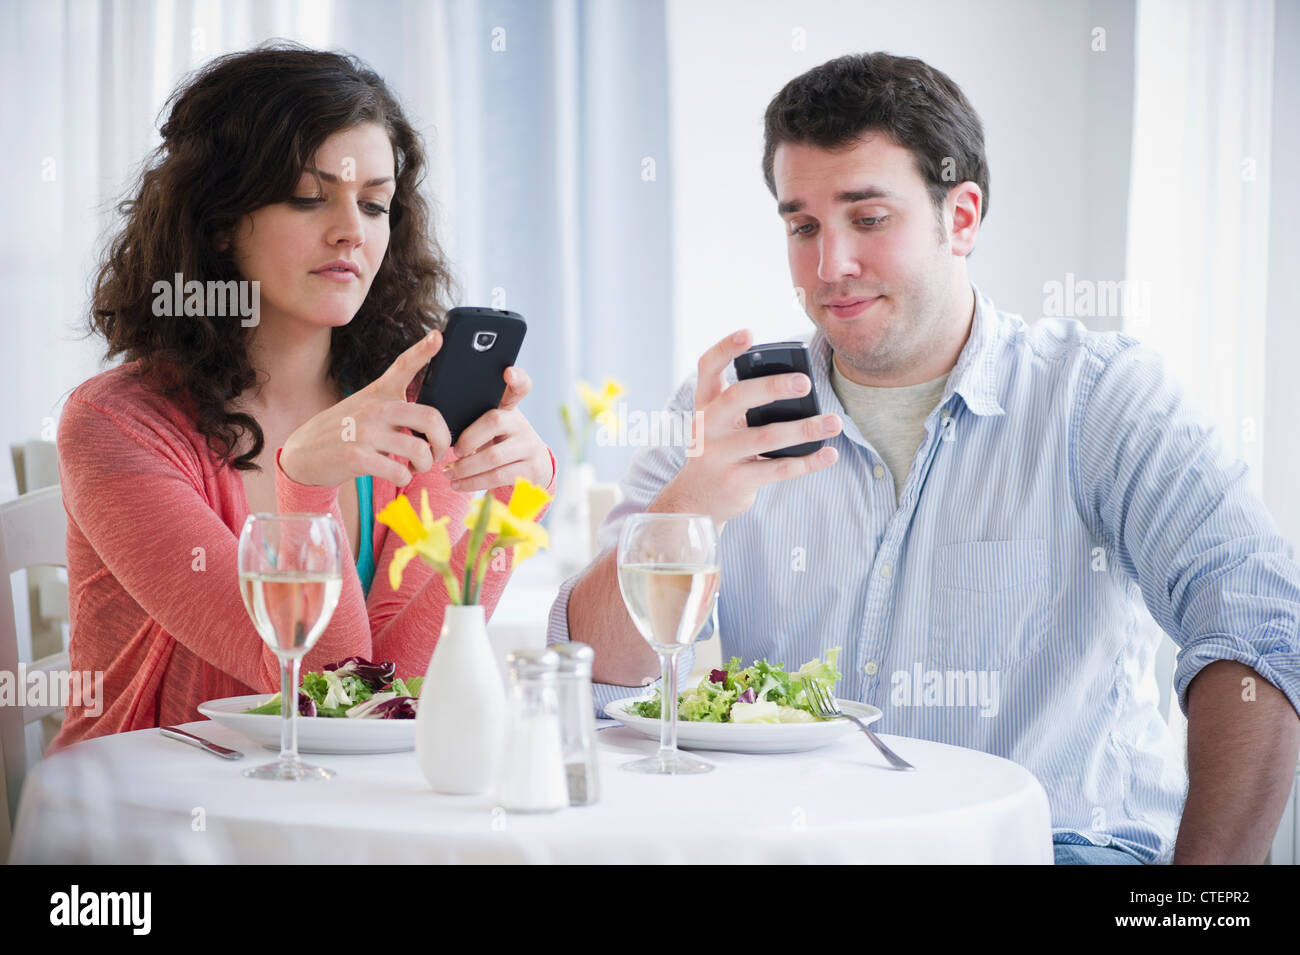 USA, New Jersey, Jersey City, Couple having dinner and text messaging Stock Photo